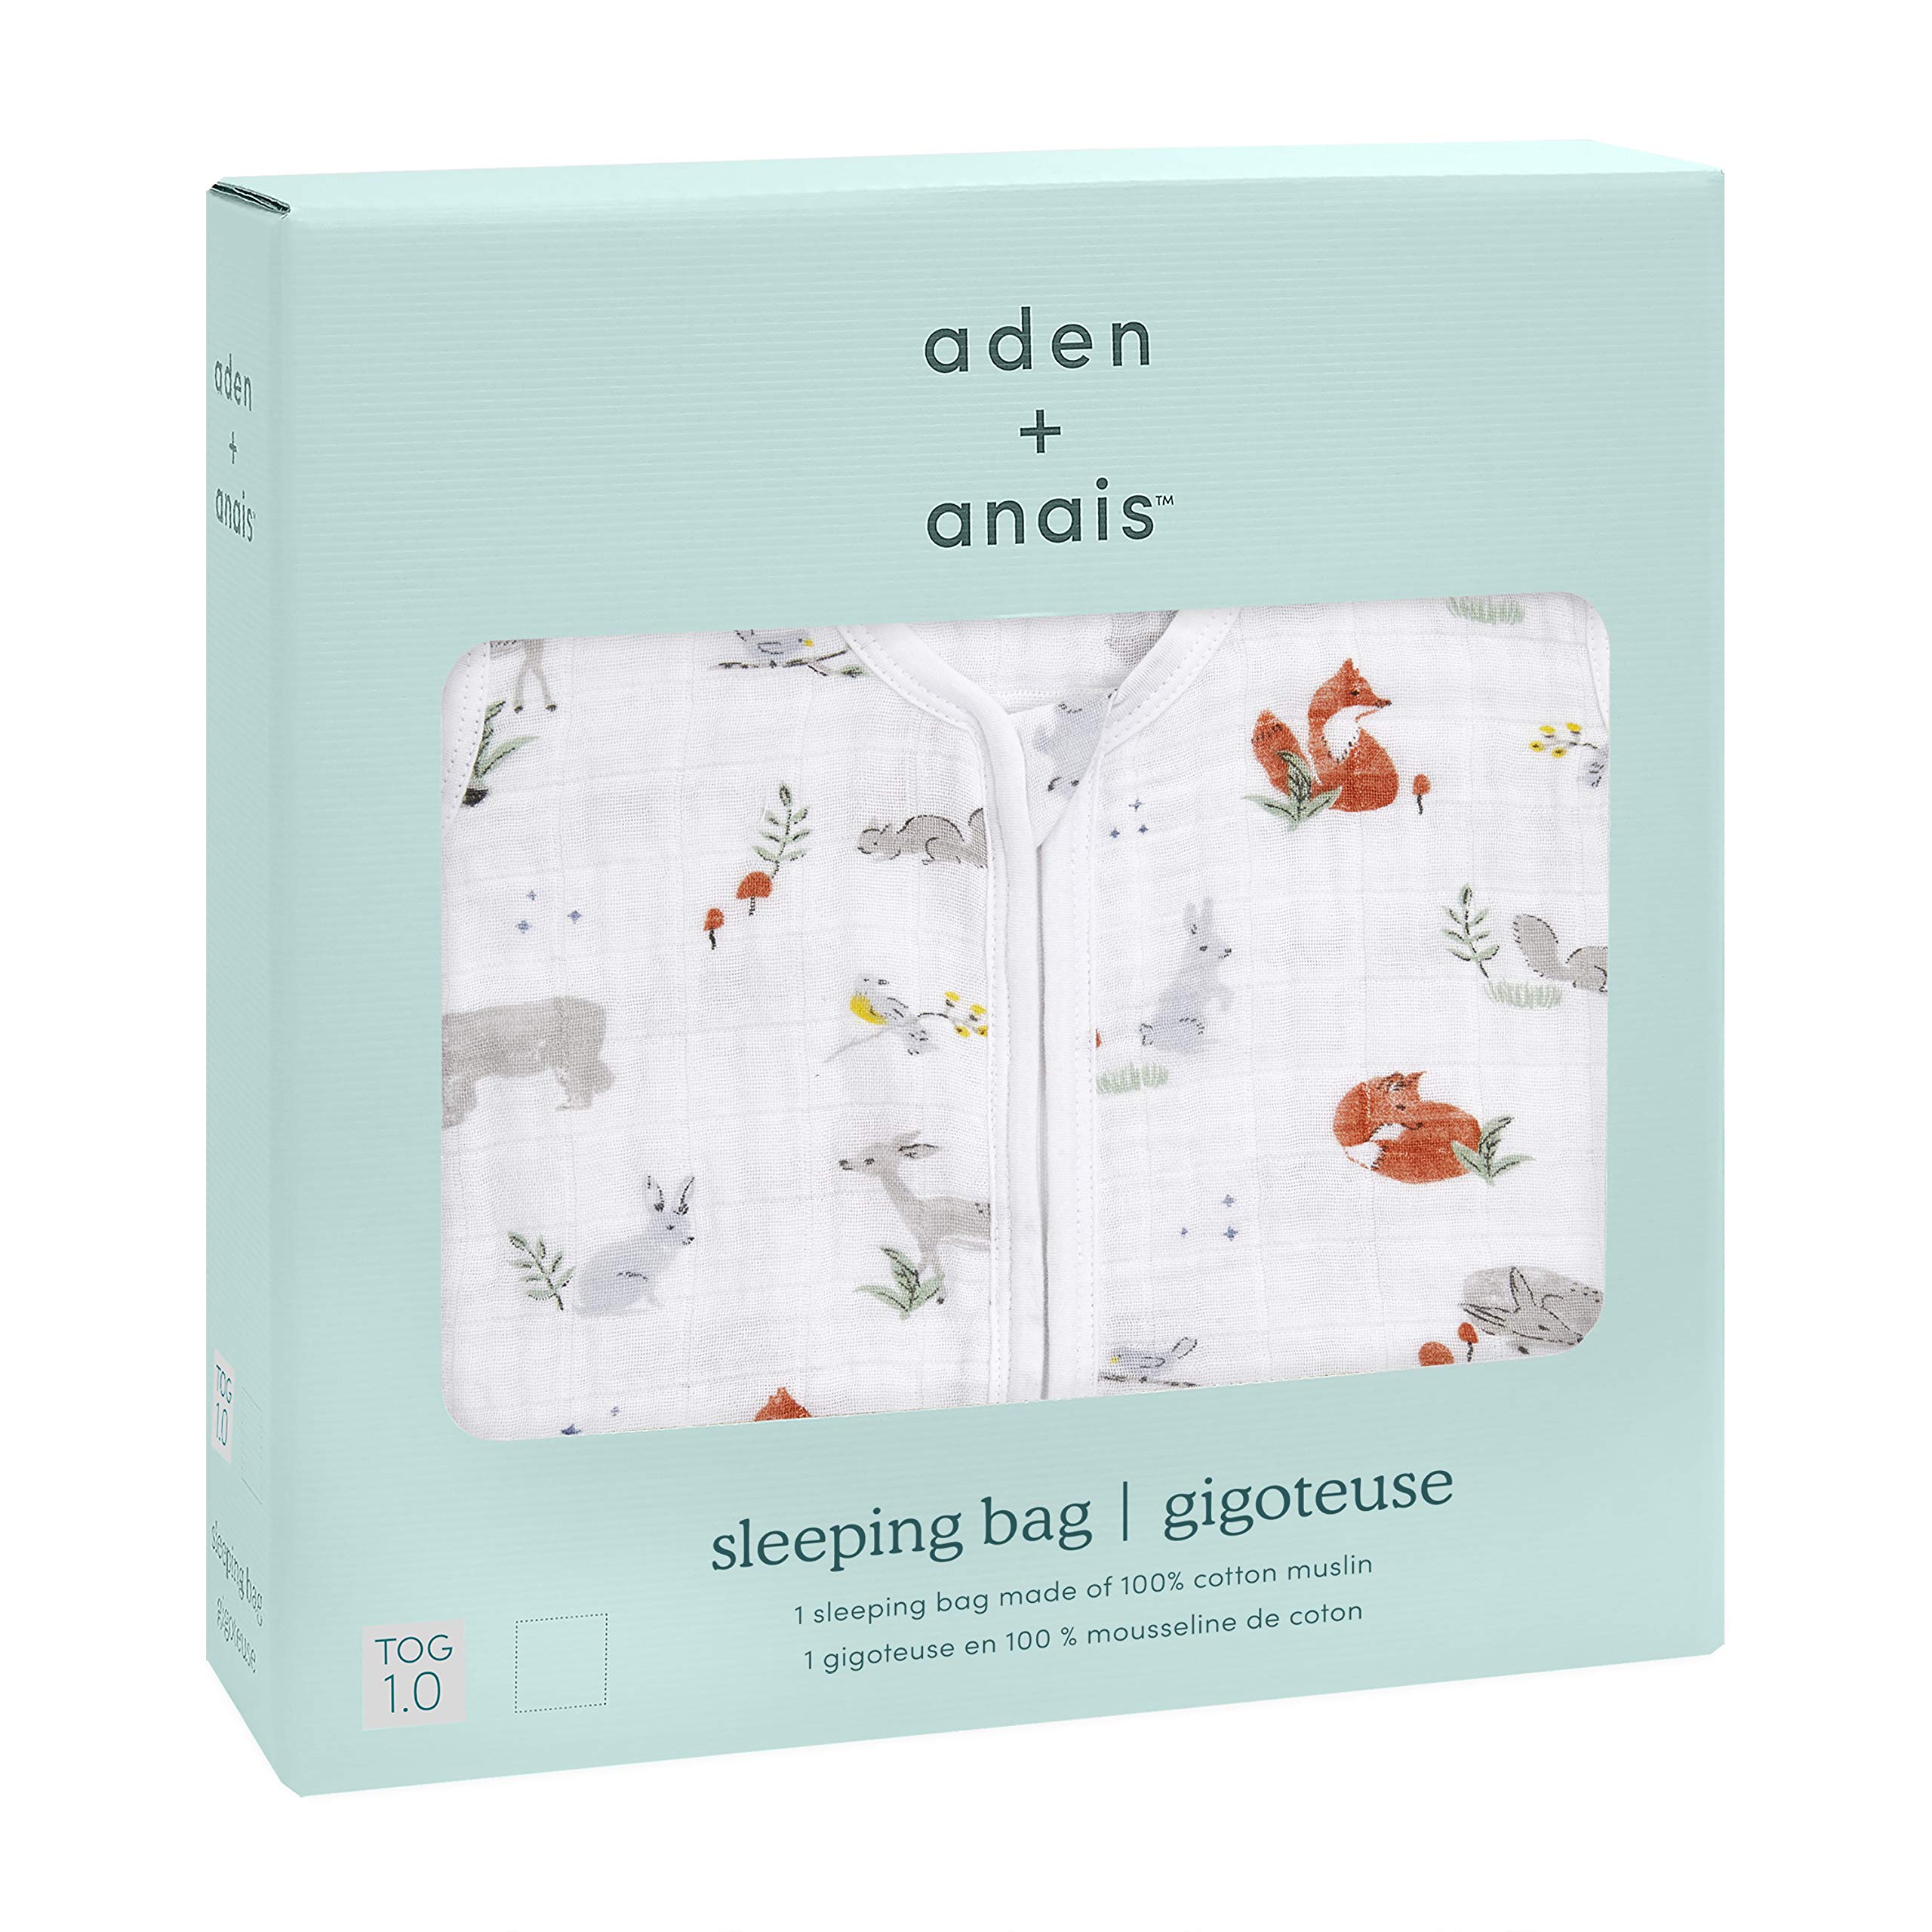 aden + anais Baby Sleeping Bag, 100% Cotton Muslin, Wearable Swaddle Blanket for Girls & Boys, Newborn Sleep Sack, Breathable & Lightweight, TOG Rating 1.0, Naturally Eco Forest, Large, 12-18 Months